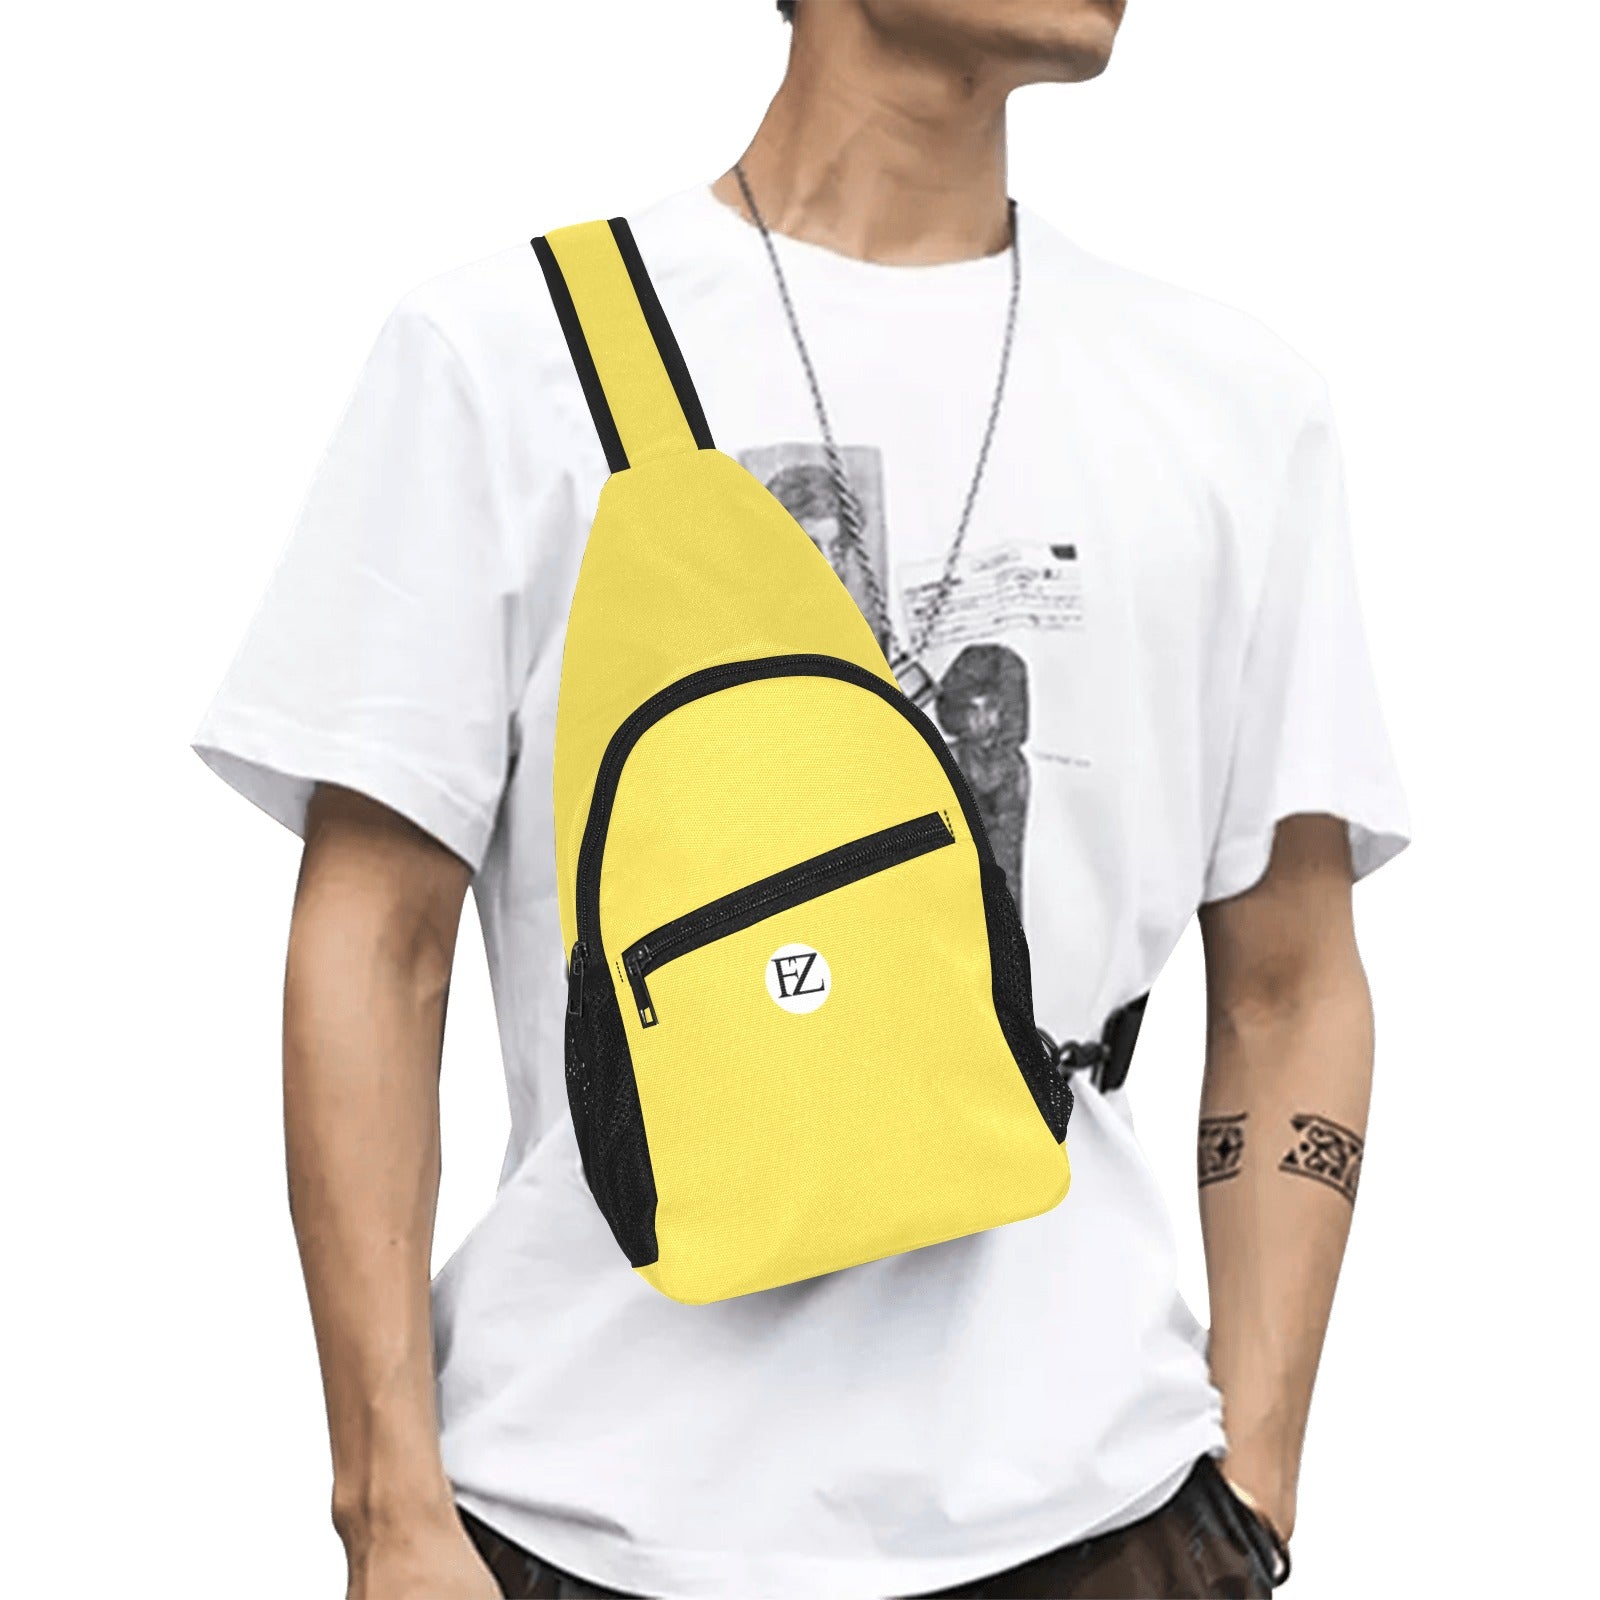 fz men's chest bag too one size / fz chest bag-yellow all over print chest bag(model1719)